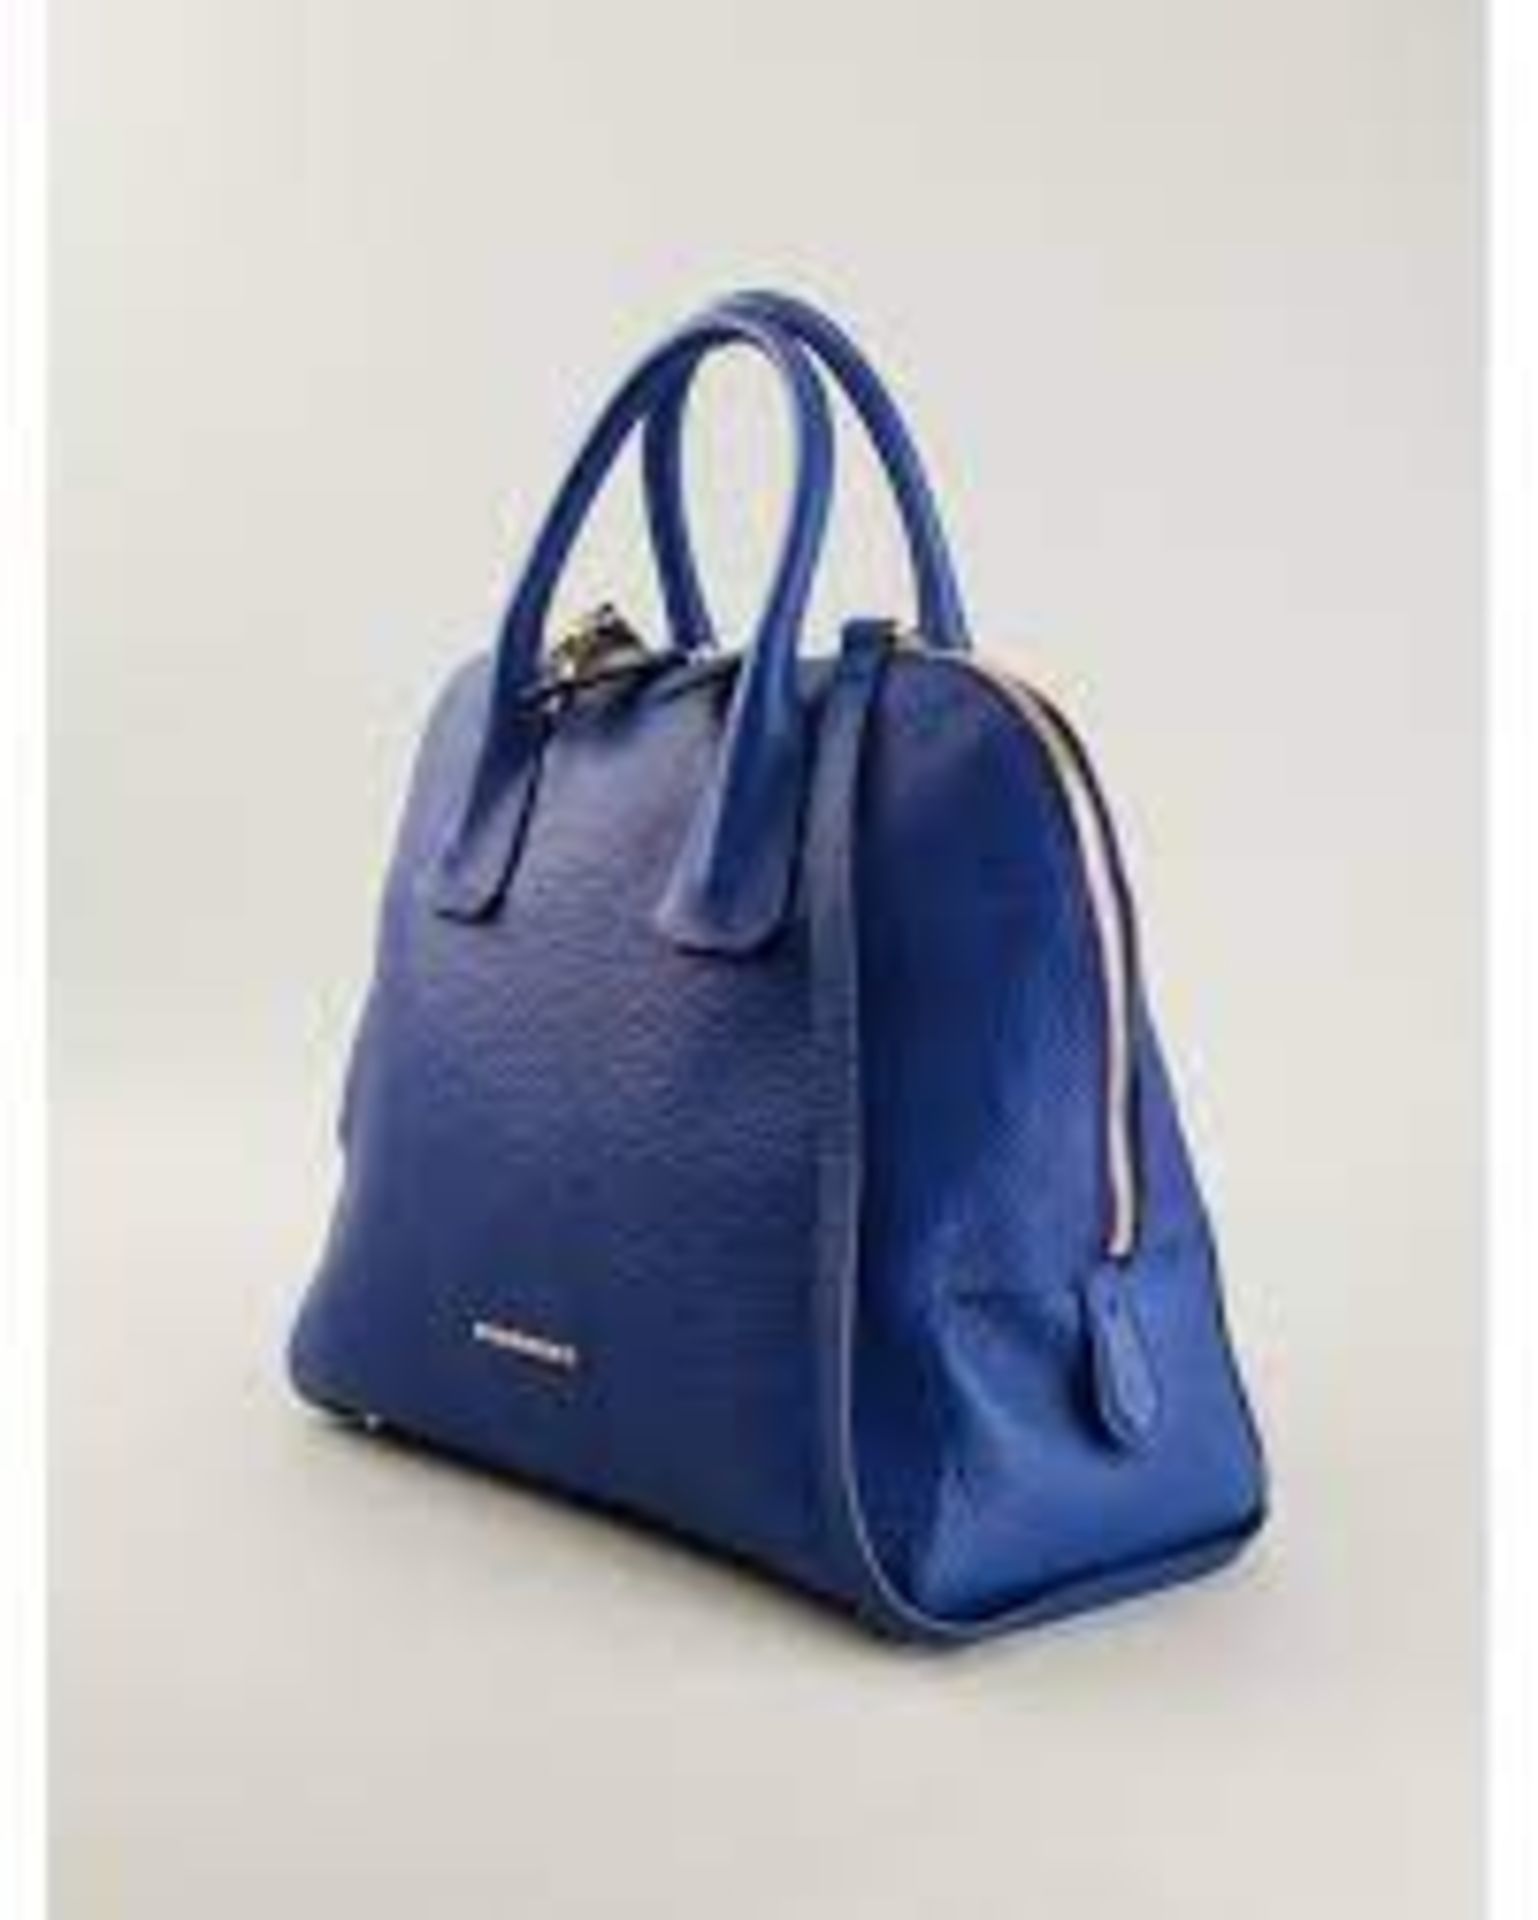 Genuine Burberry Medium Bowling Bag in Blue. RRP £805. This shoulder bag has room for all of your